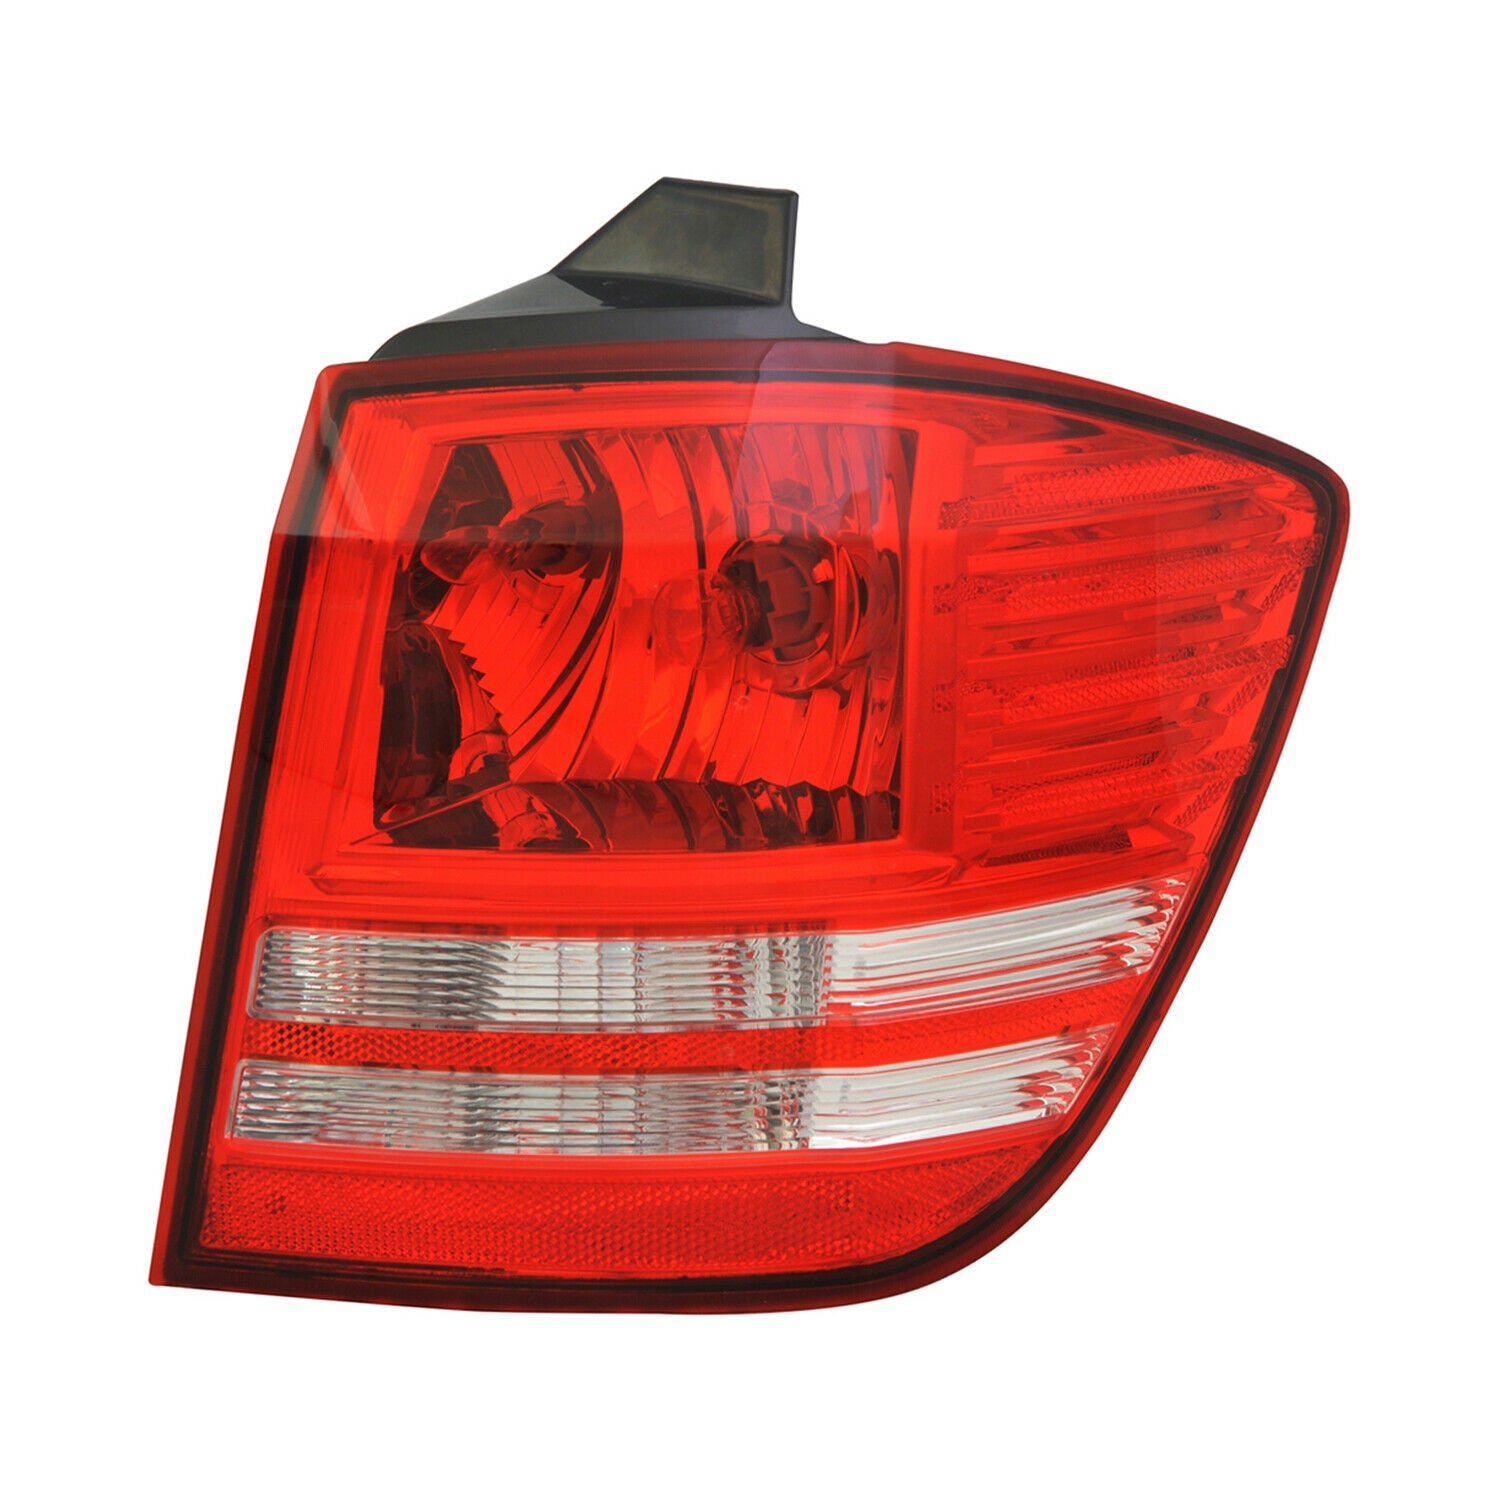 New Right Tail Light Assembly Fits Dodge Journey 2009-2017 - Etsy